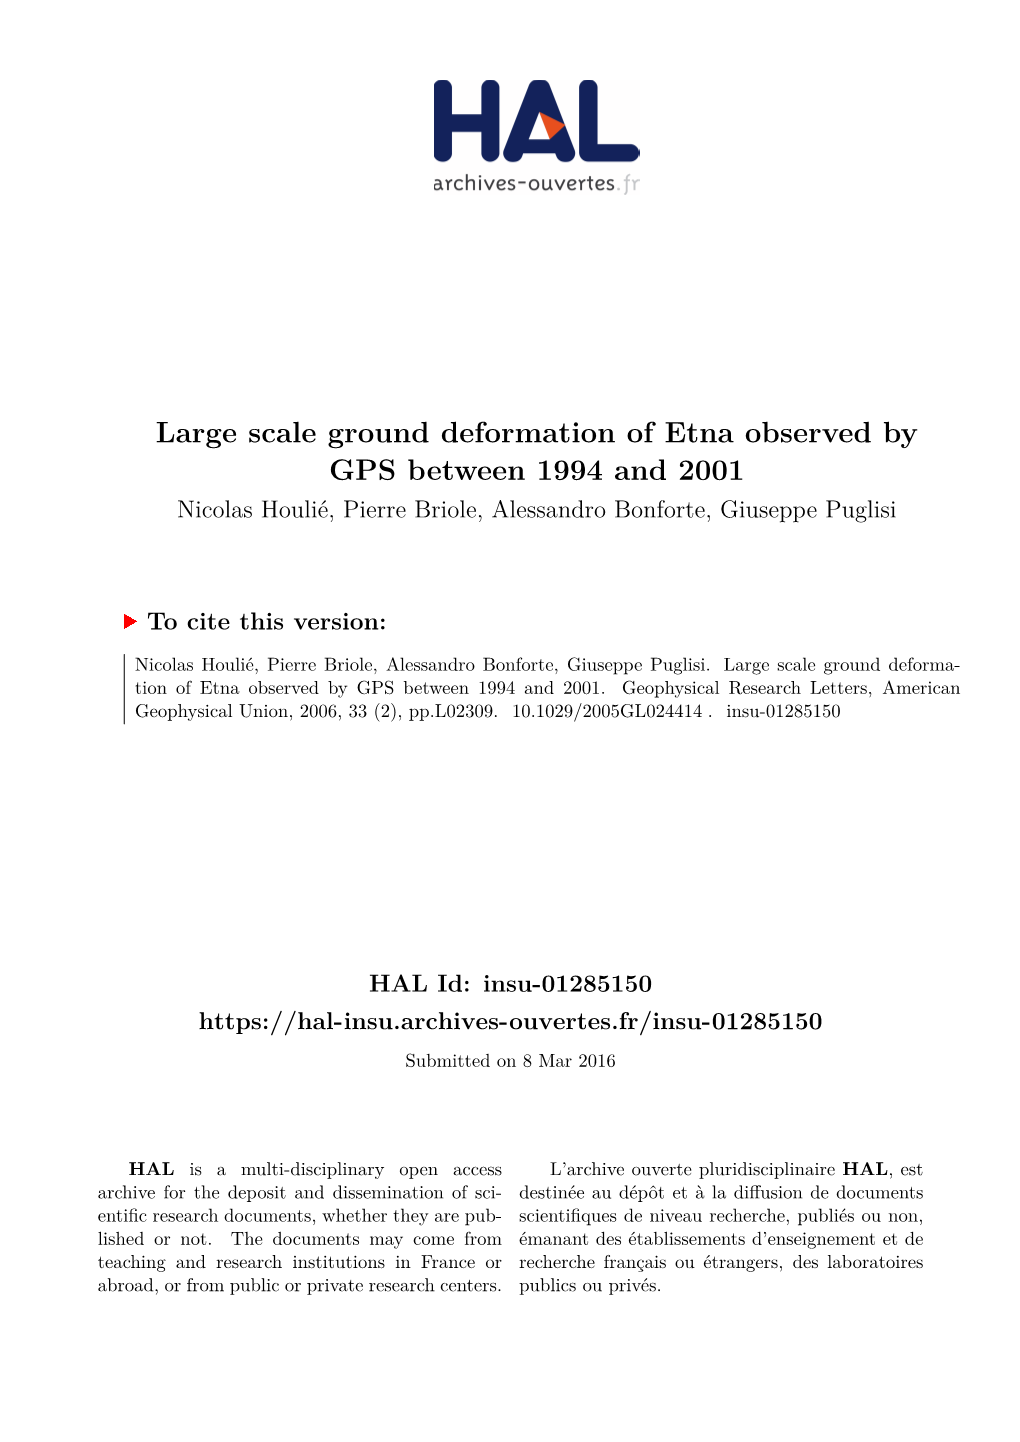 Large Scale Ground Deformation of Etna Observed by GPS Between 1994 and 2001 Nicolas Houlié, Pierre Briole, Alessandro Bonforte, Giuseppe Puglisi